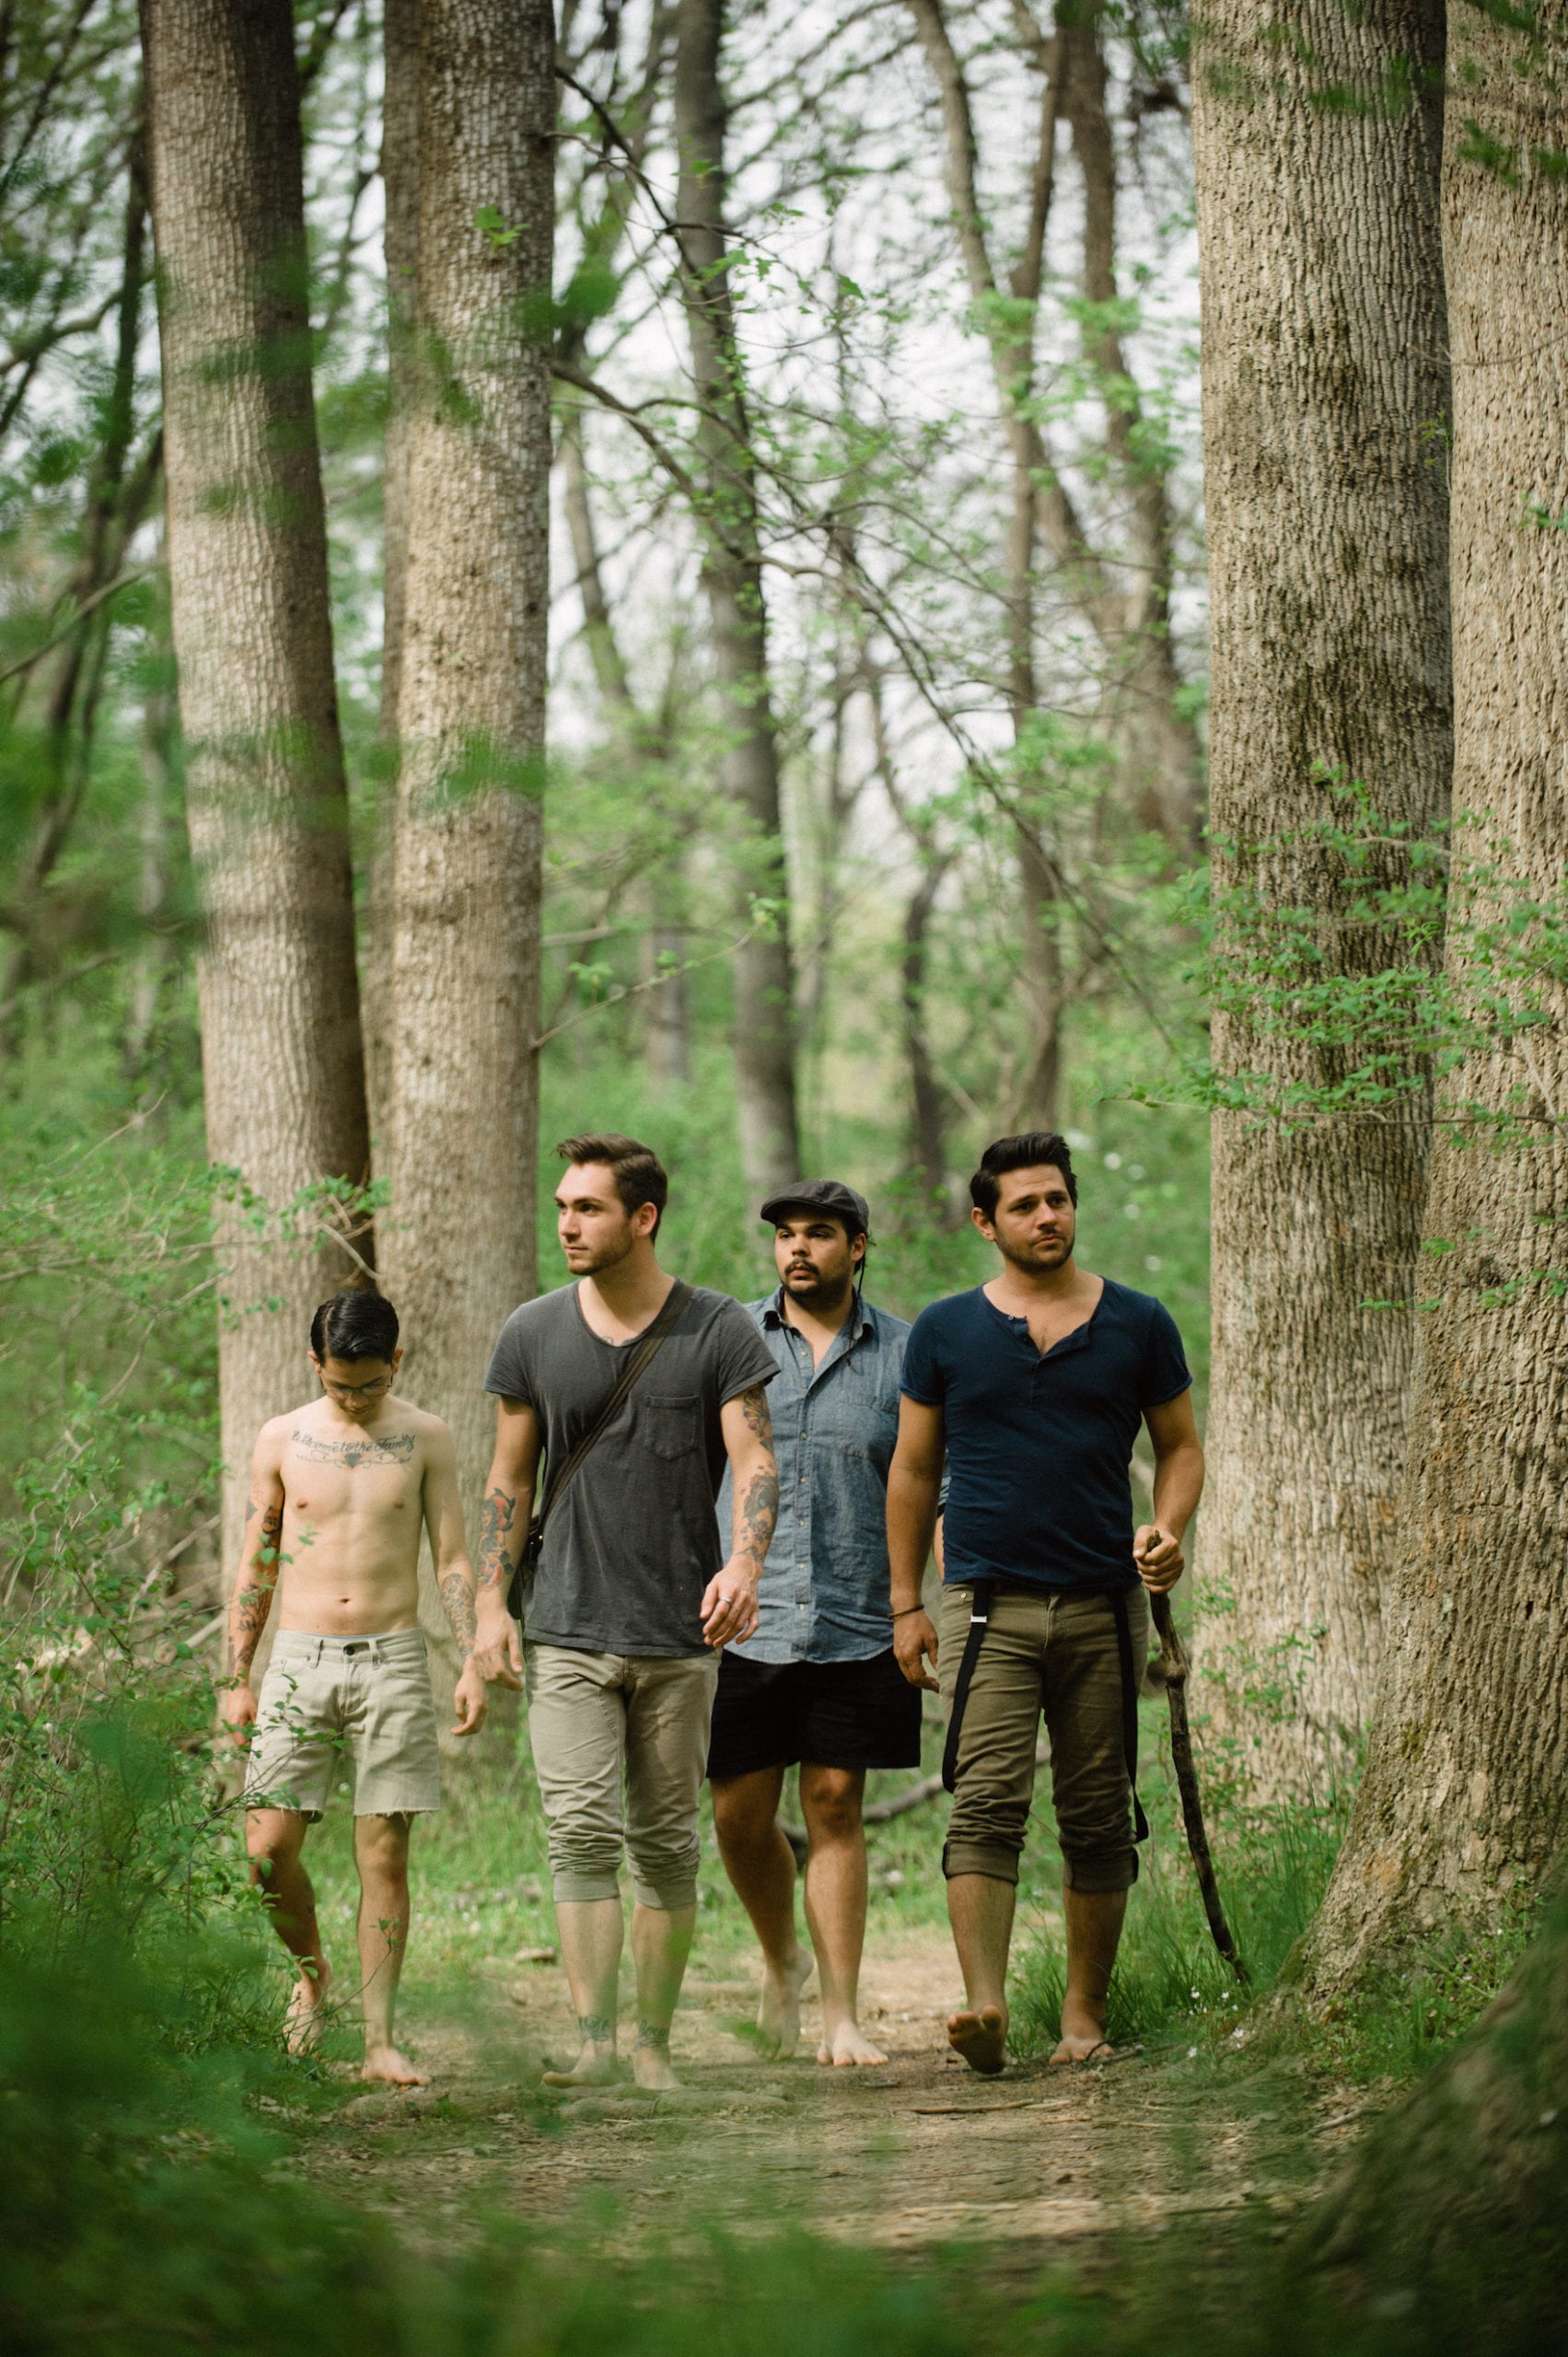 Four men walking in a forest with one shirtless with tattoos and one holding a stick